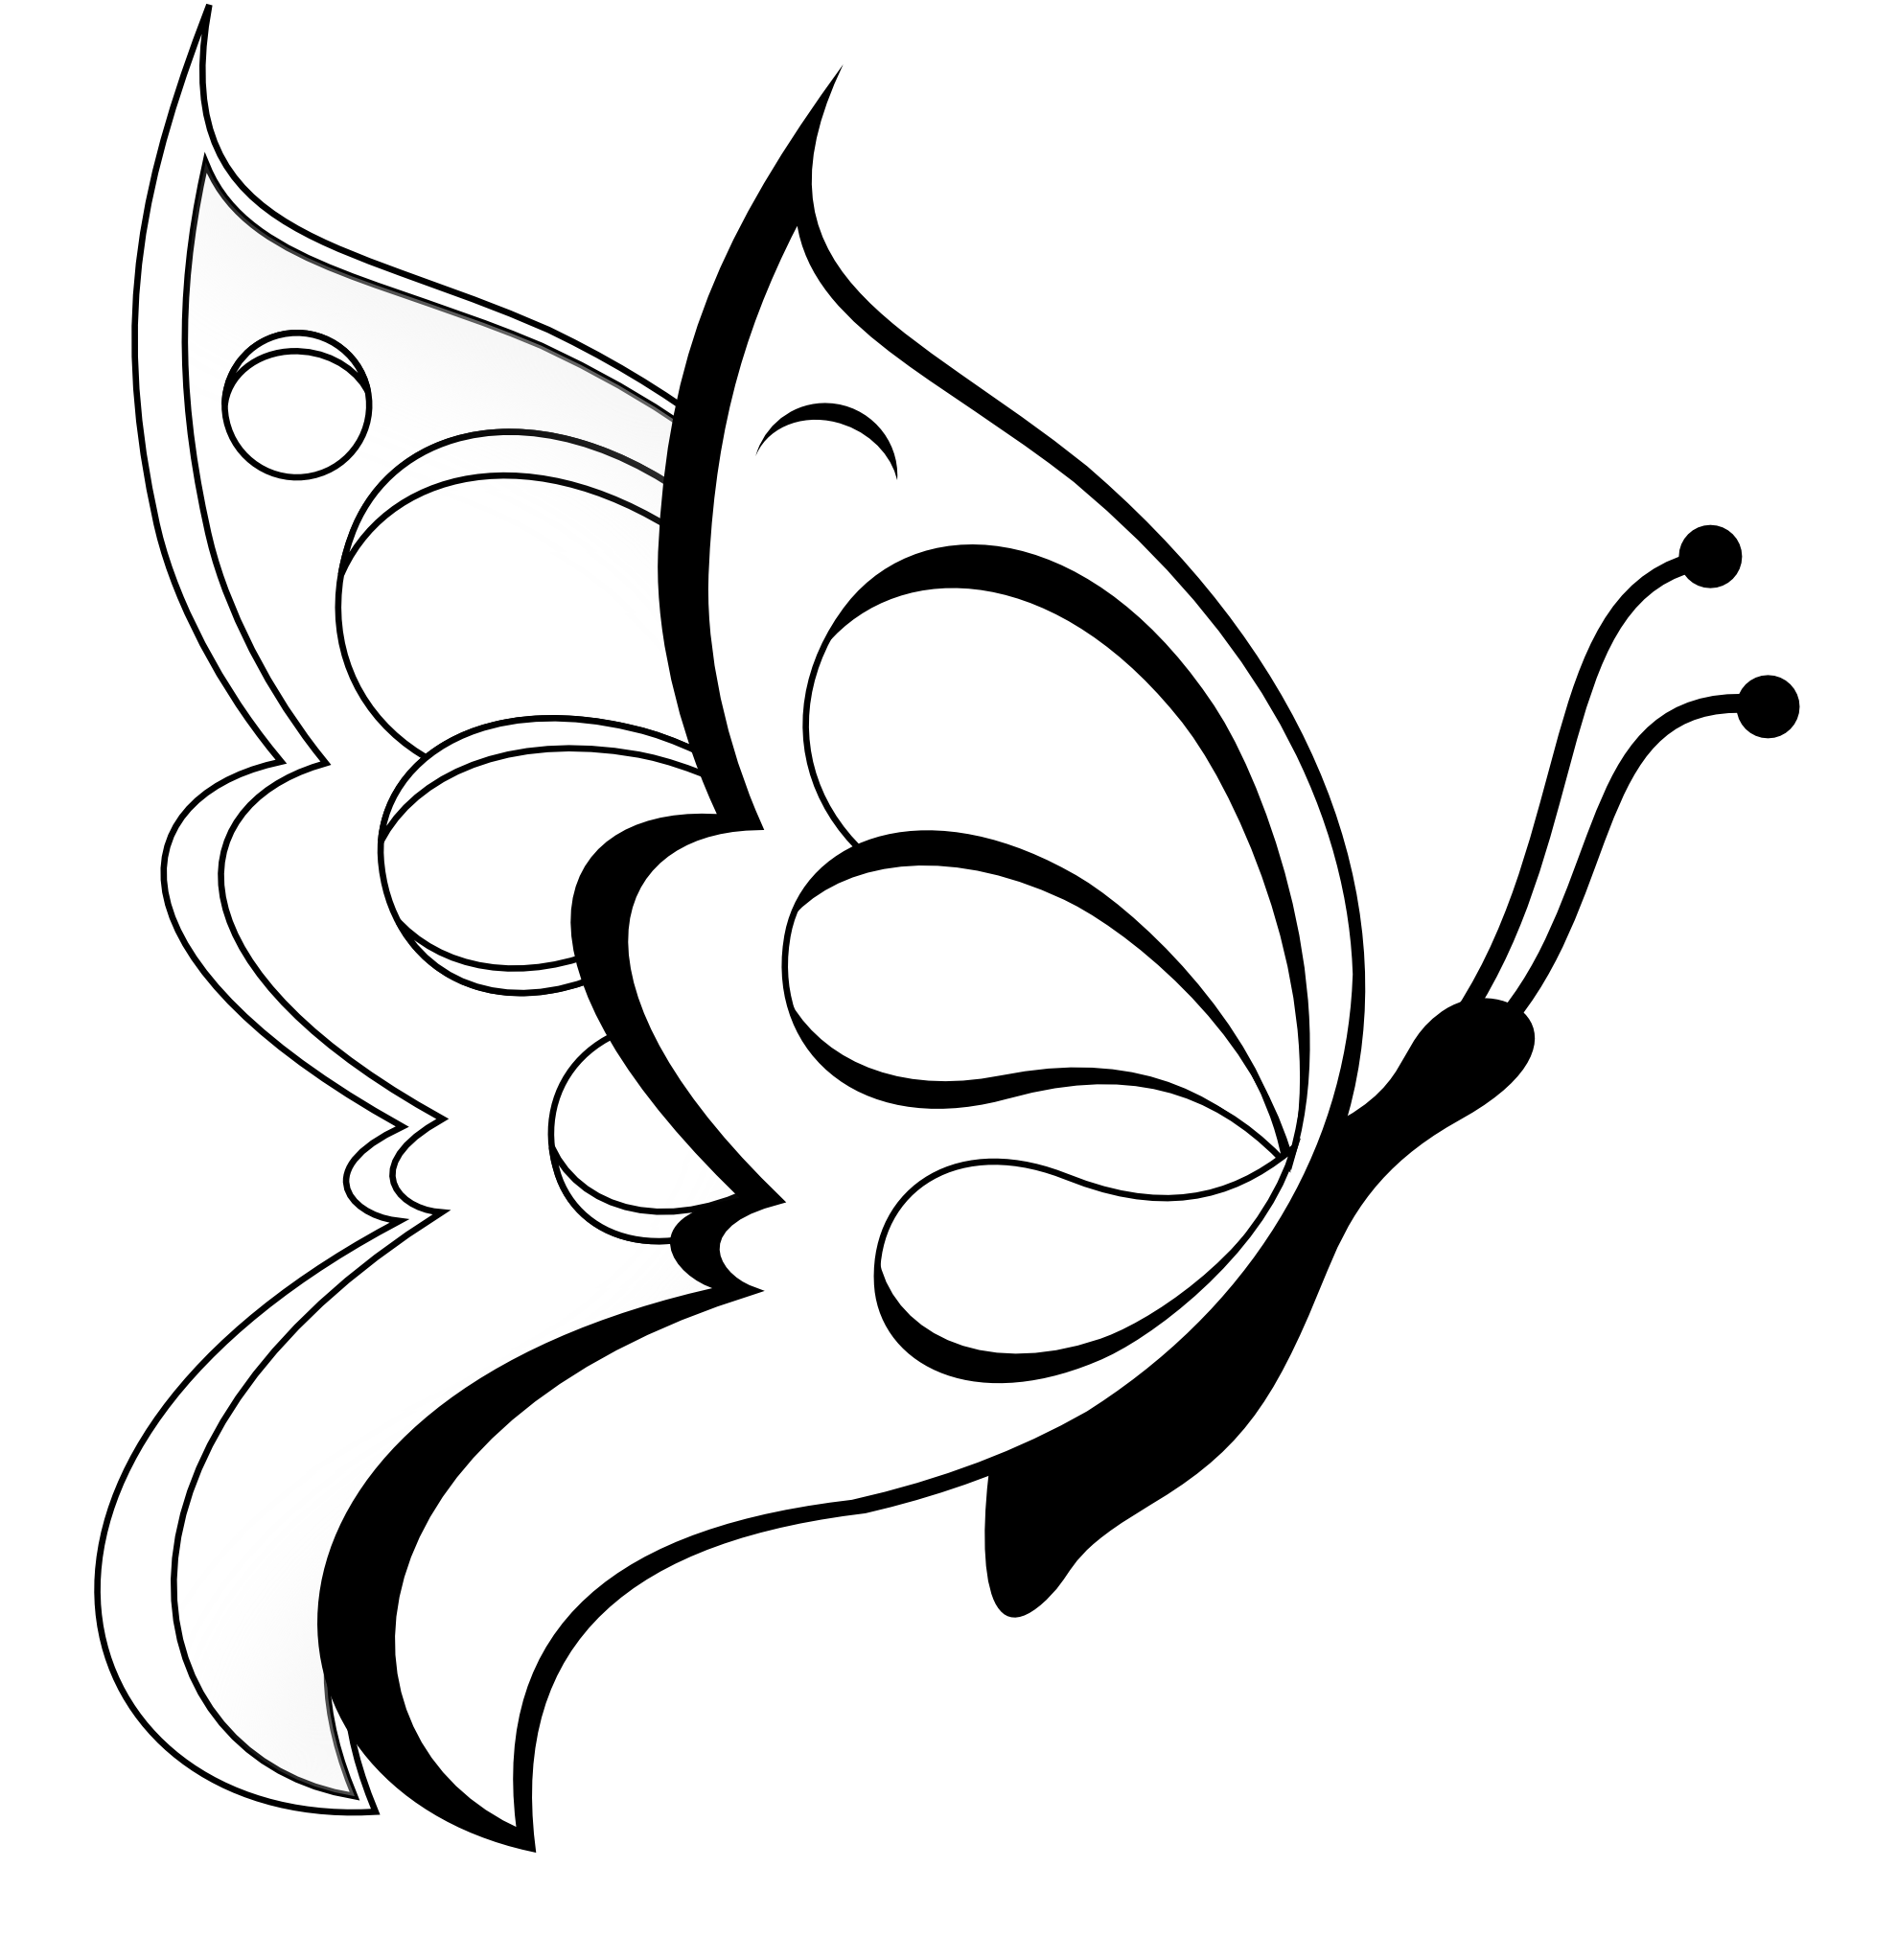 Butterfly clipart butterfly black white line art coloring - Clipartix